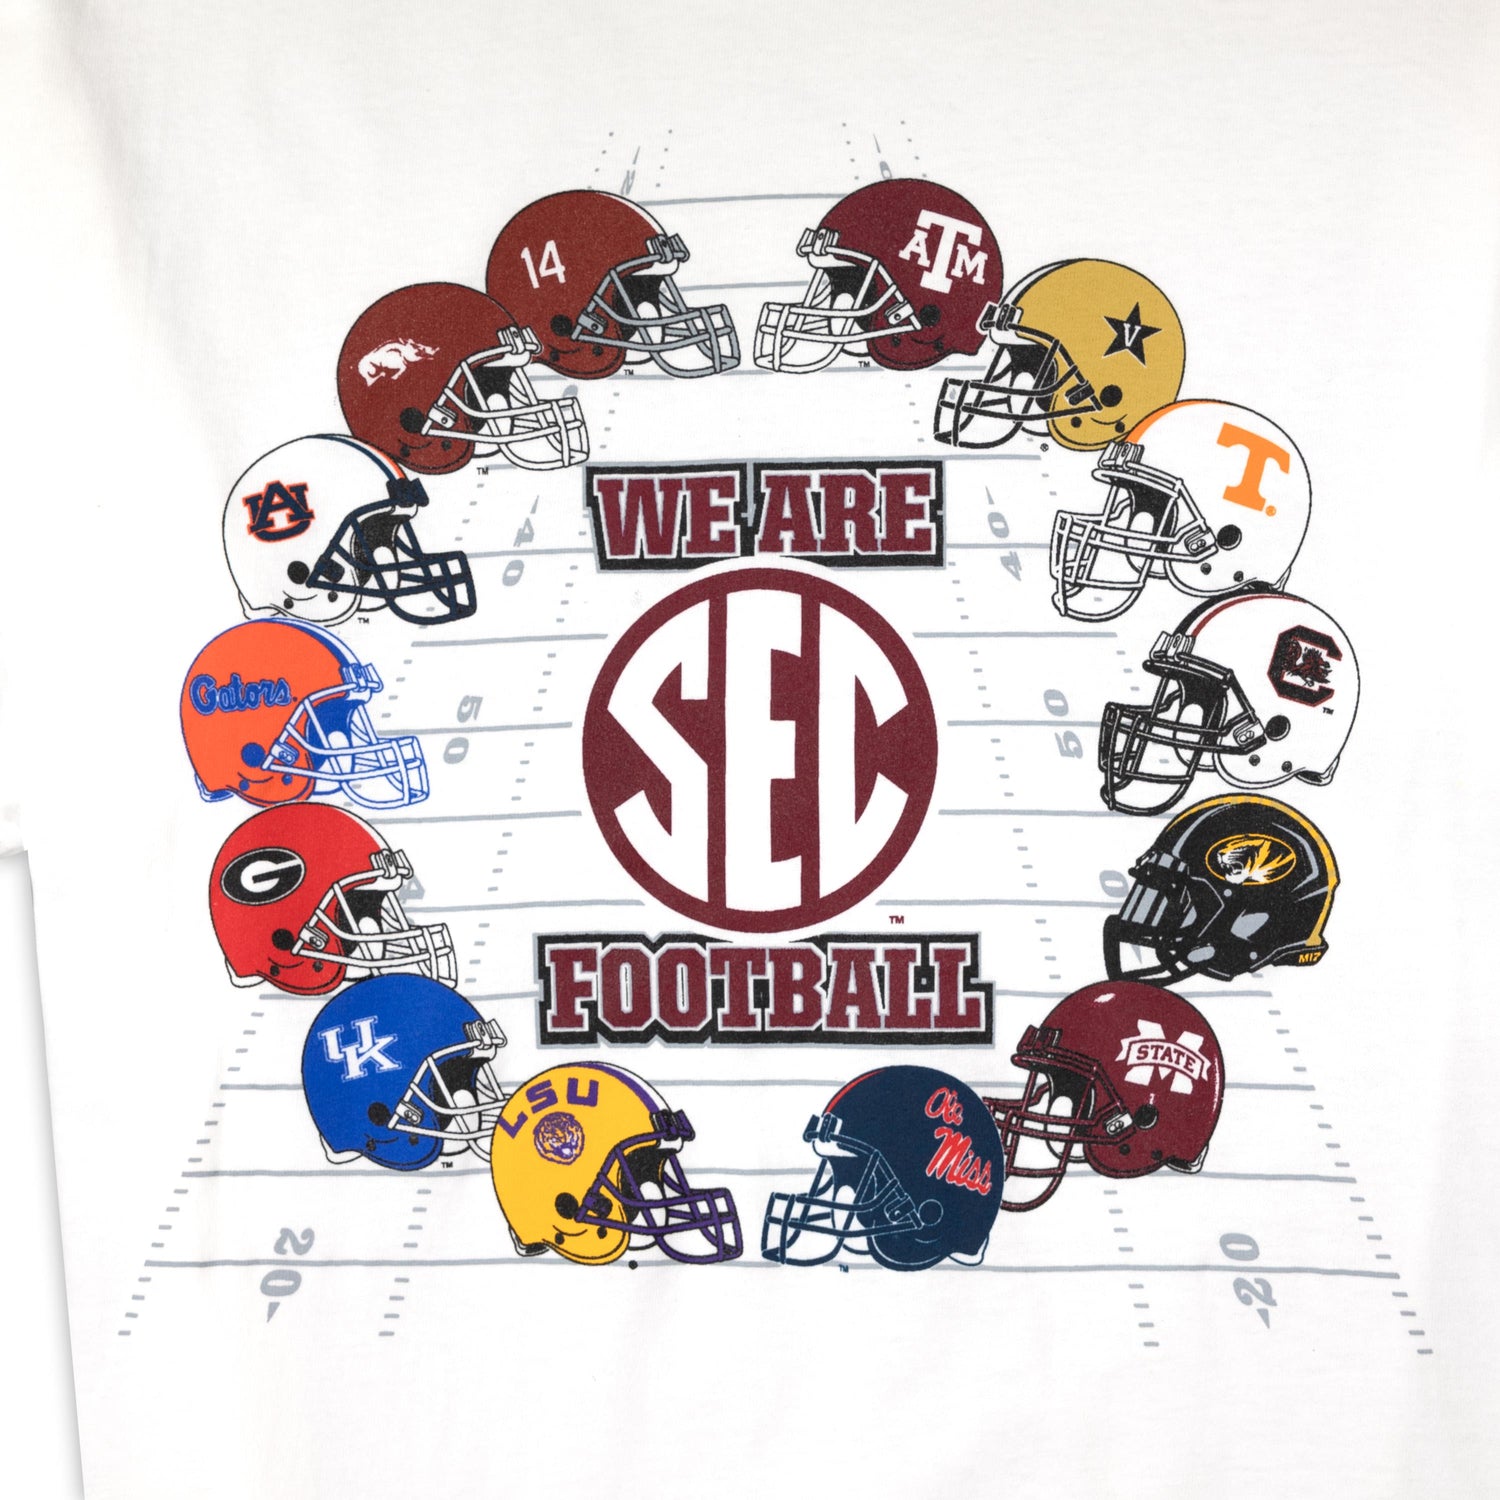 We Are SEC Football